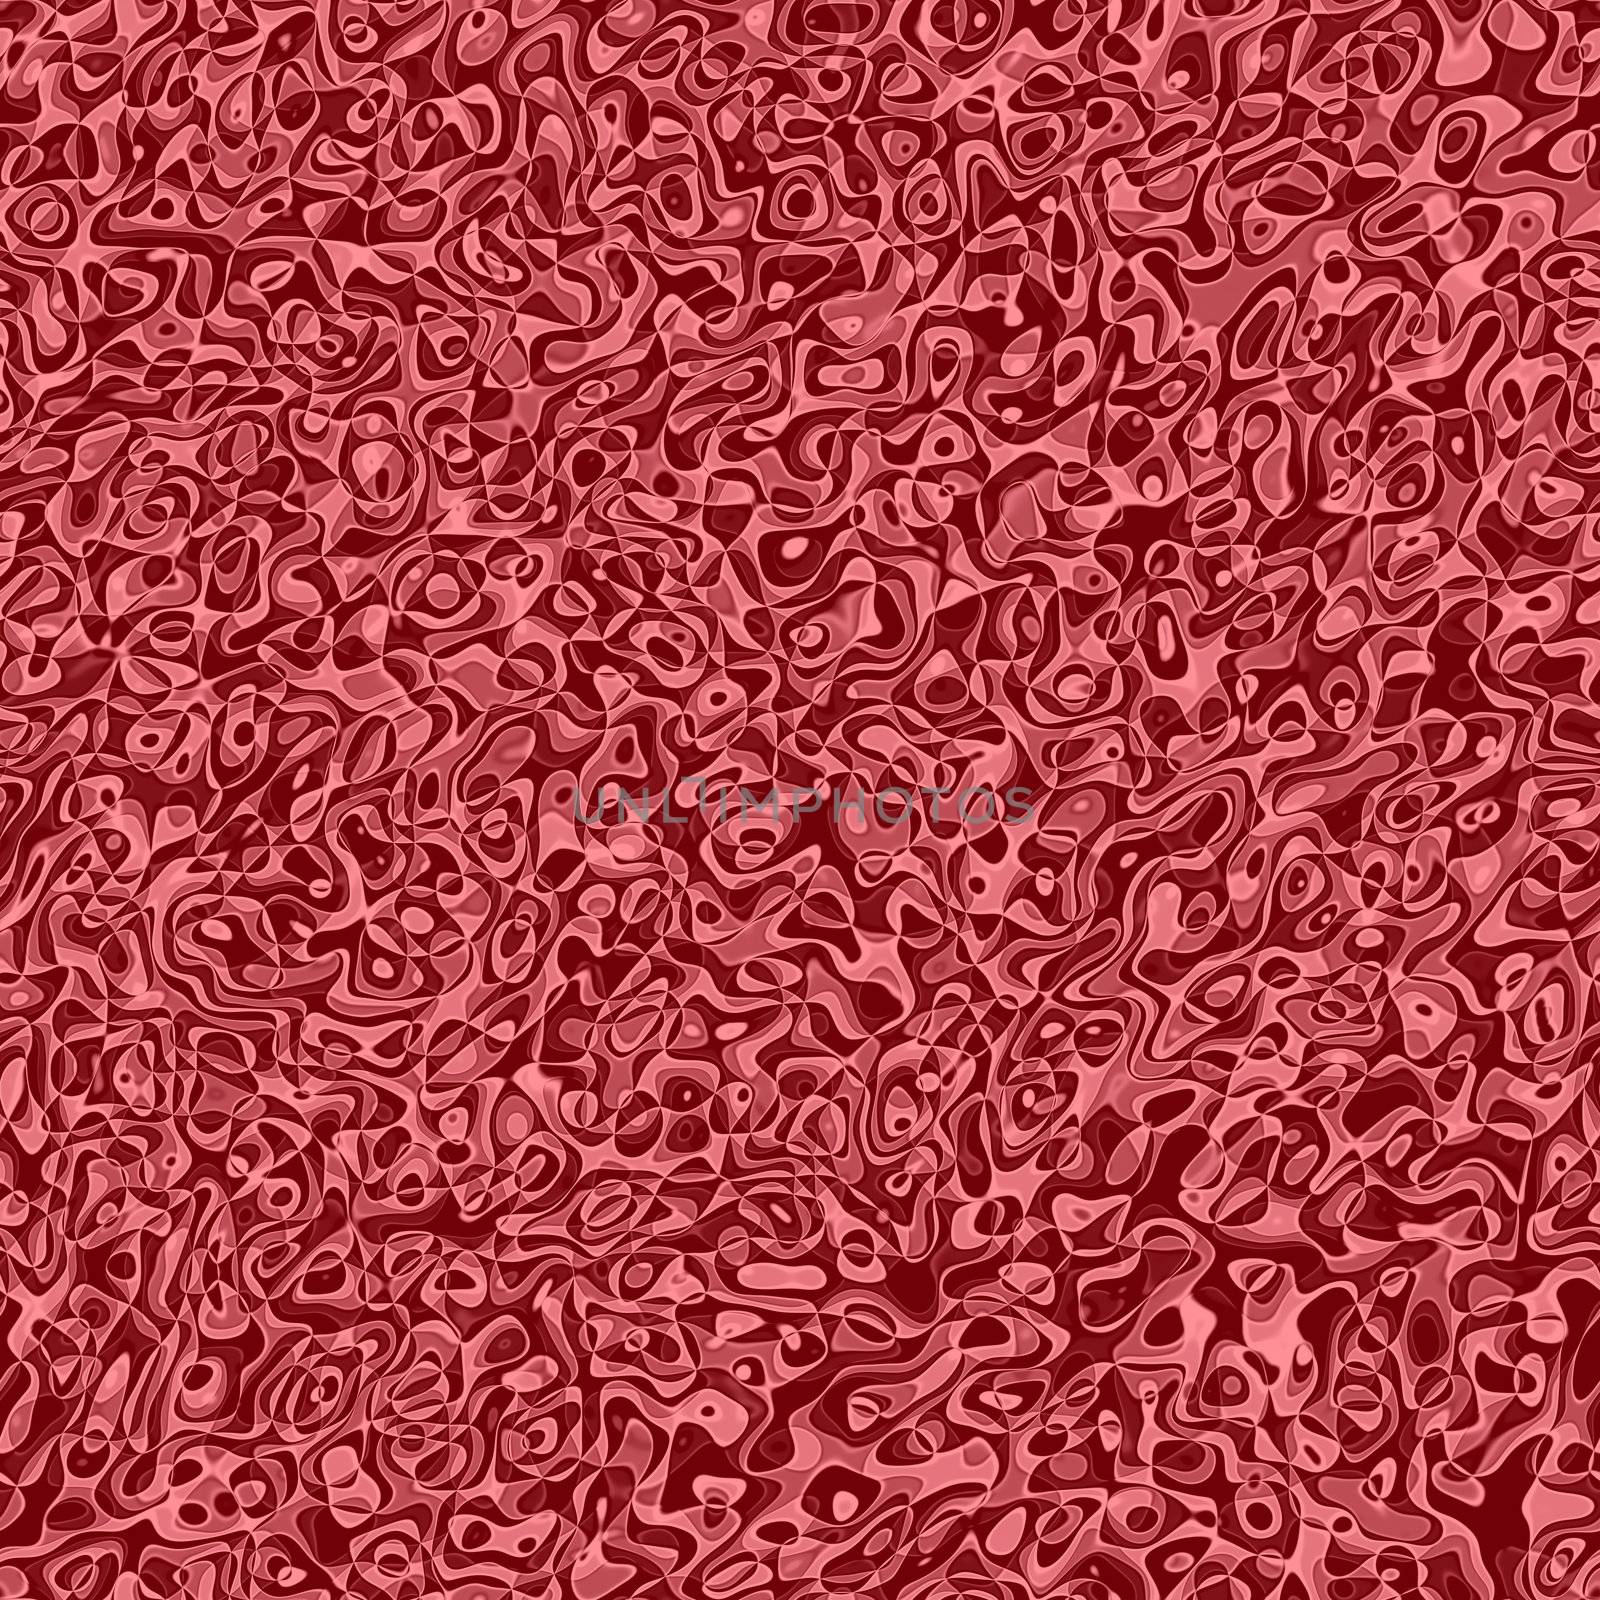 seamless texture of complex abstract red rings in pattern